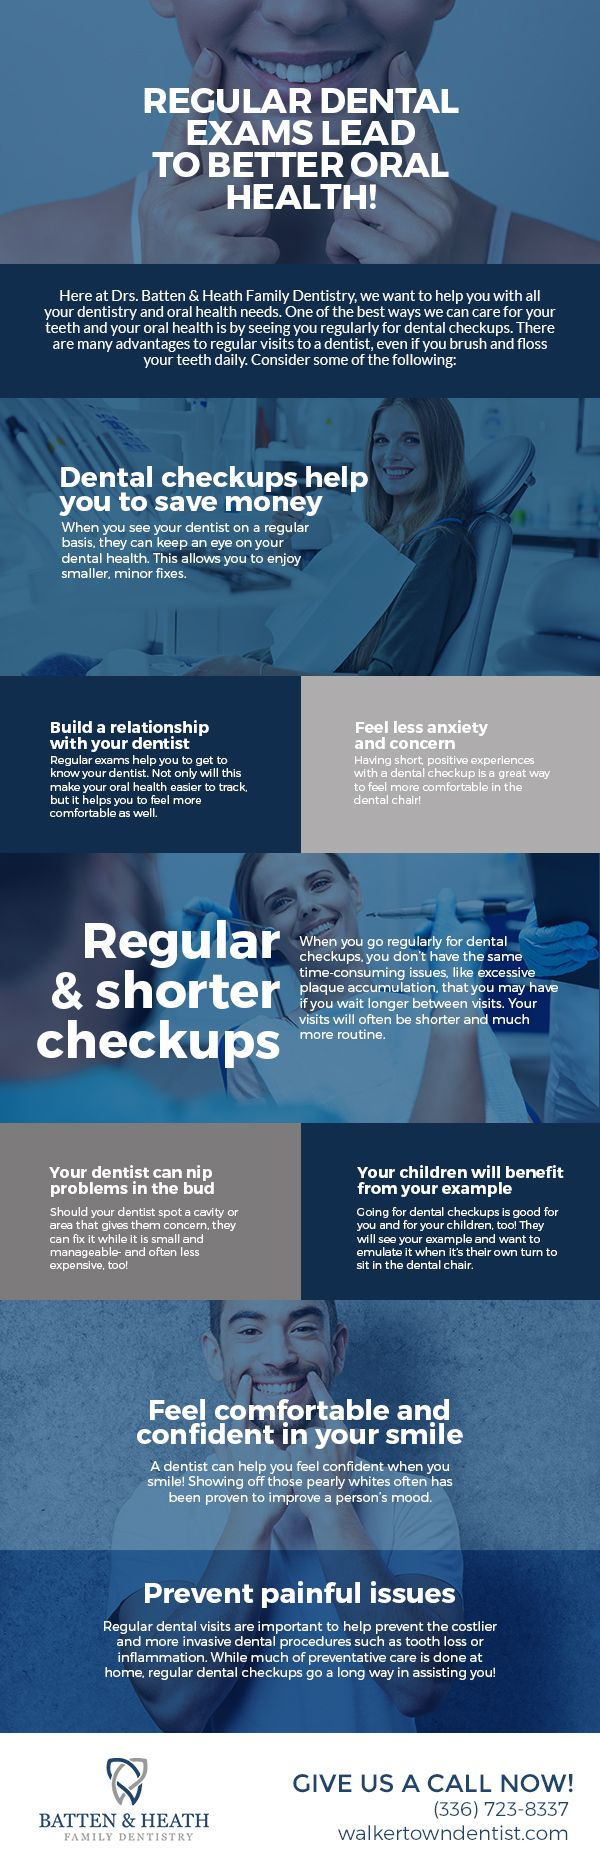 Regular Dental Exams Lead to Better Oral Health! [infographic]